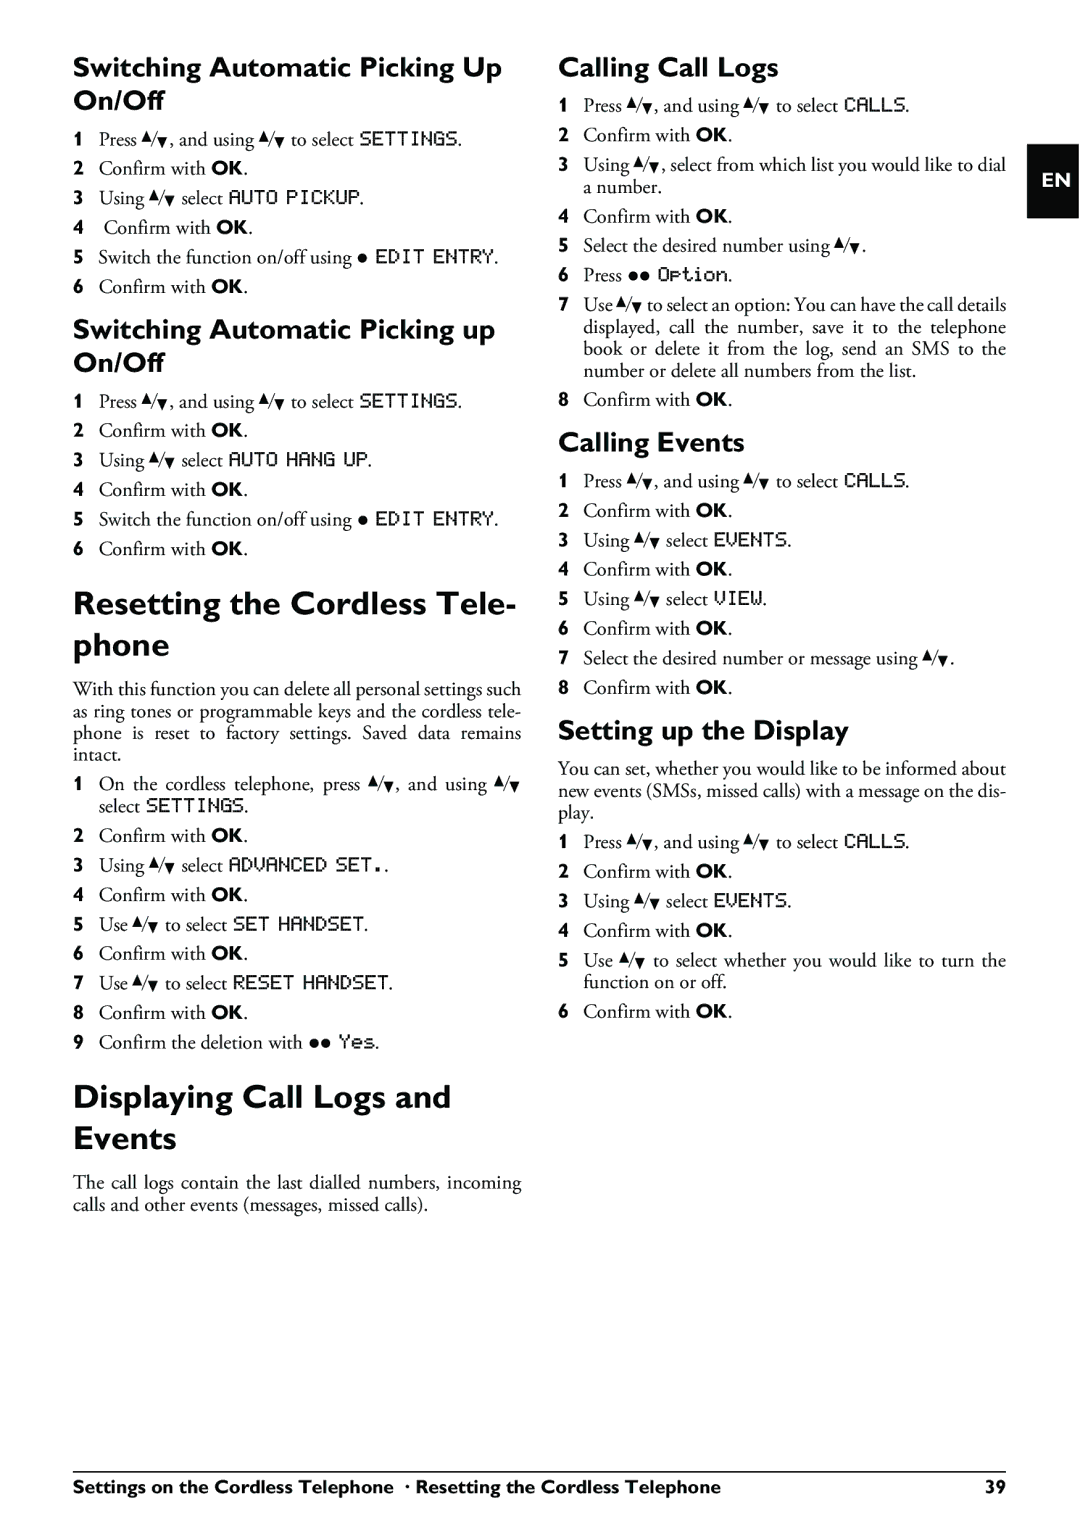 Philips PPF 650 user manual Resetting the Cordless Tele- phone, Displaying Call Logs and Events 